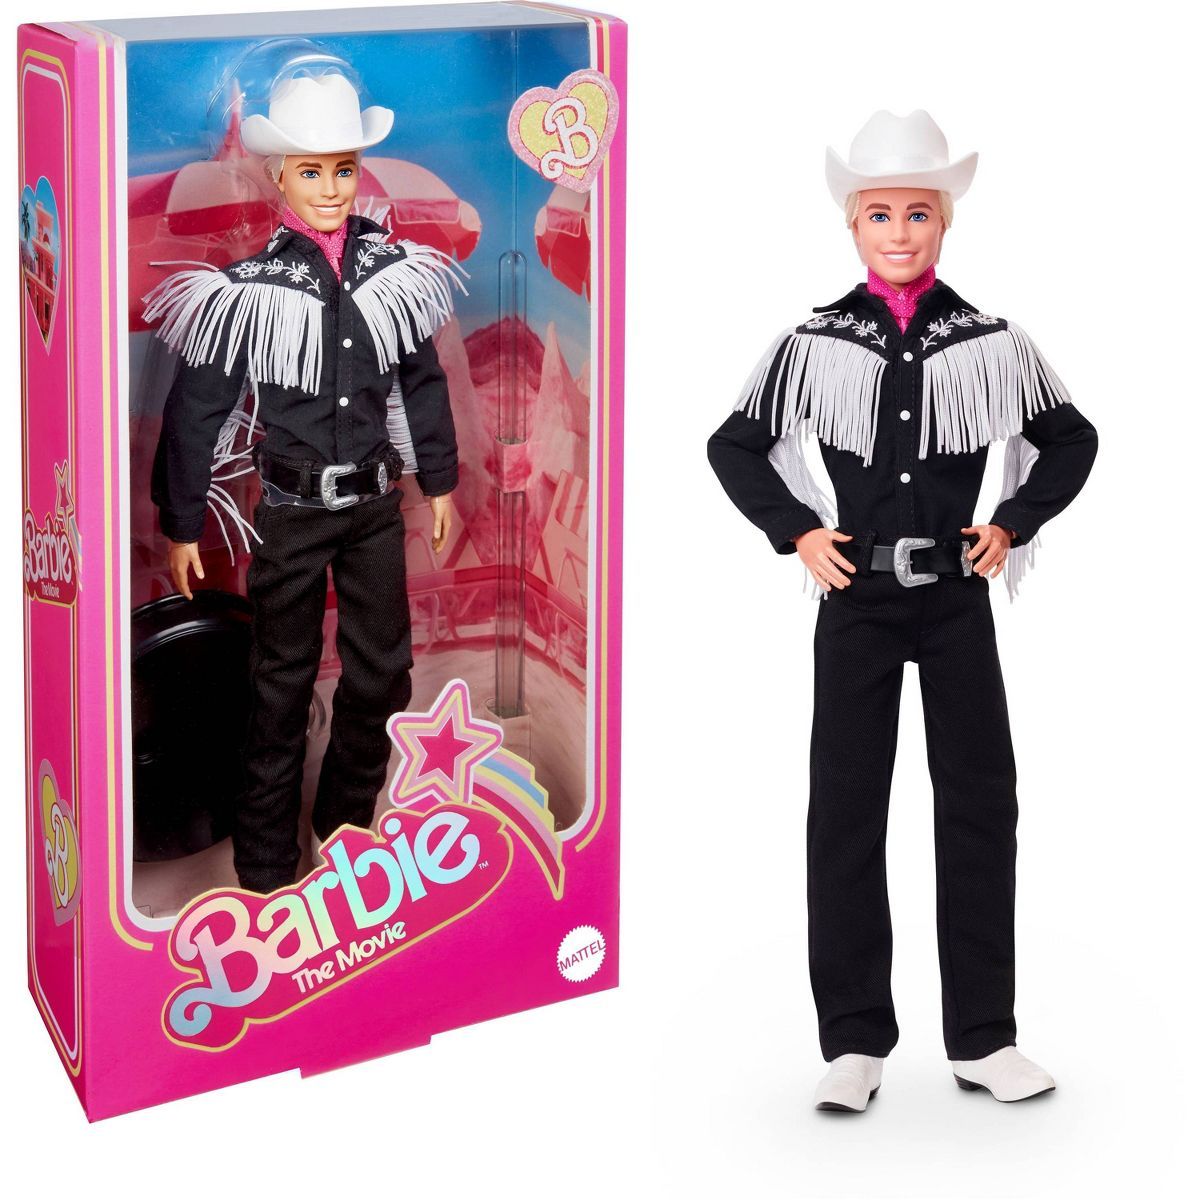 Barbie The Movie Collectible Ken Doll Wearing Black and White Western Outfit (Target Exclusive) | Target